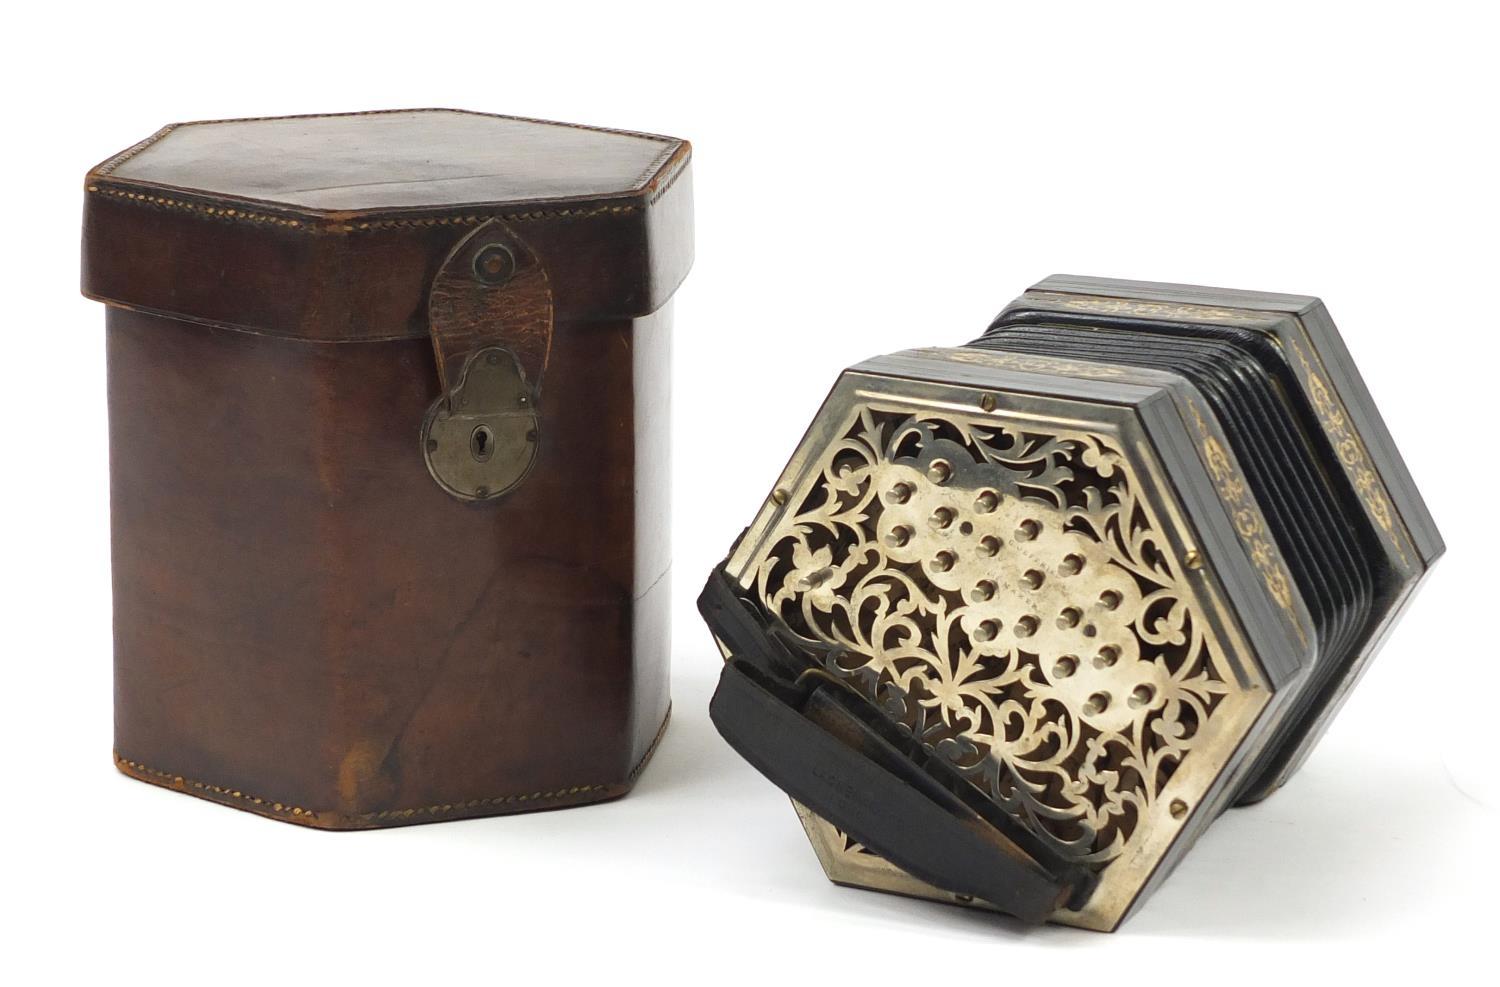 Charles Jeffries, 19th century 39 button concertina with velvet lined case, the concertina having